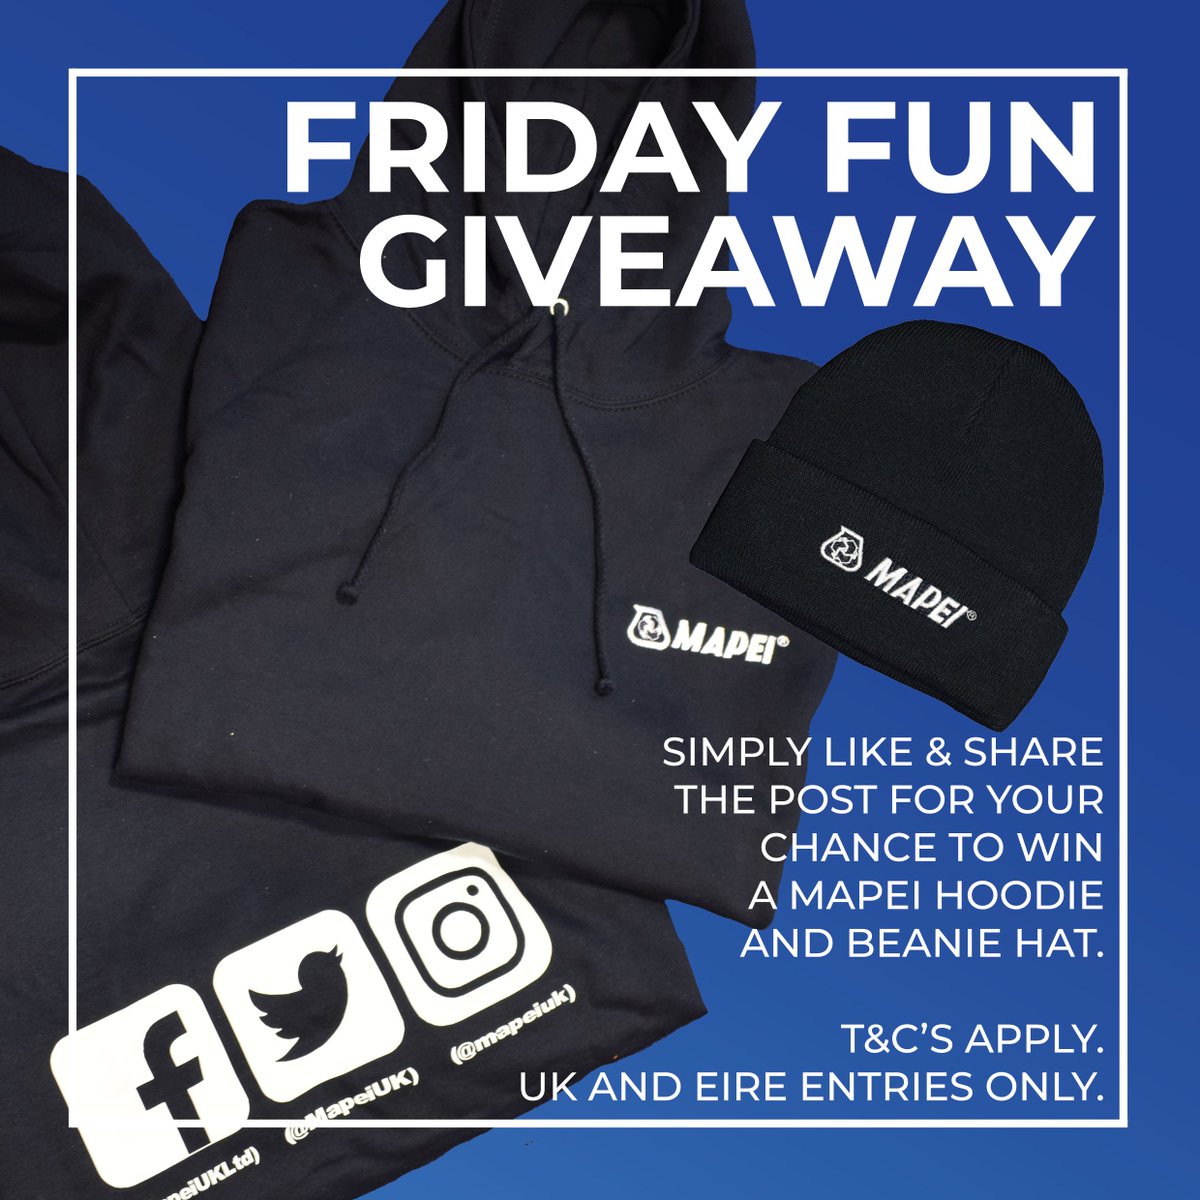 Thank #Mapei it's Friday! As ever it's #FridayFun competition time. Simply like and RT this to enter. A winner will be randomly selected from all the entries we receive here and on our Instagram & Facebook accounts & announced after 4pm this. Good luck! (UK & EIRE entries only.)